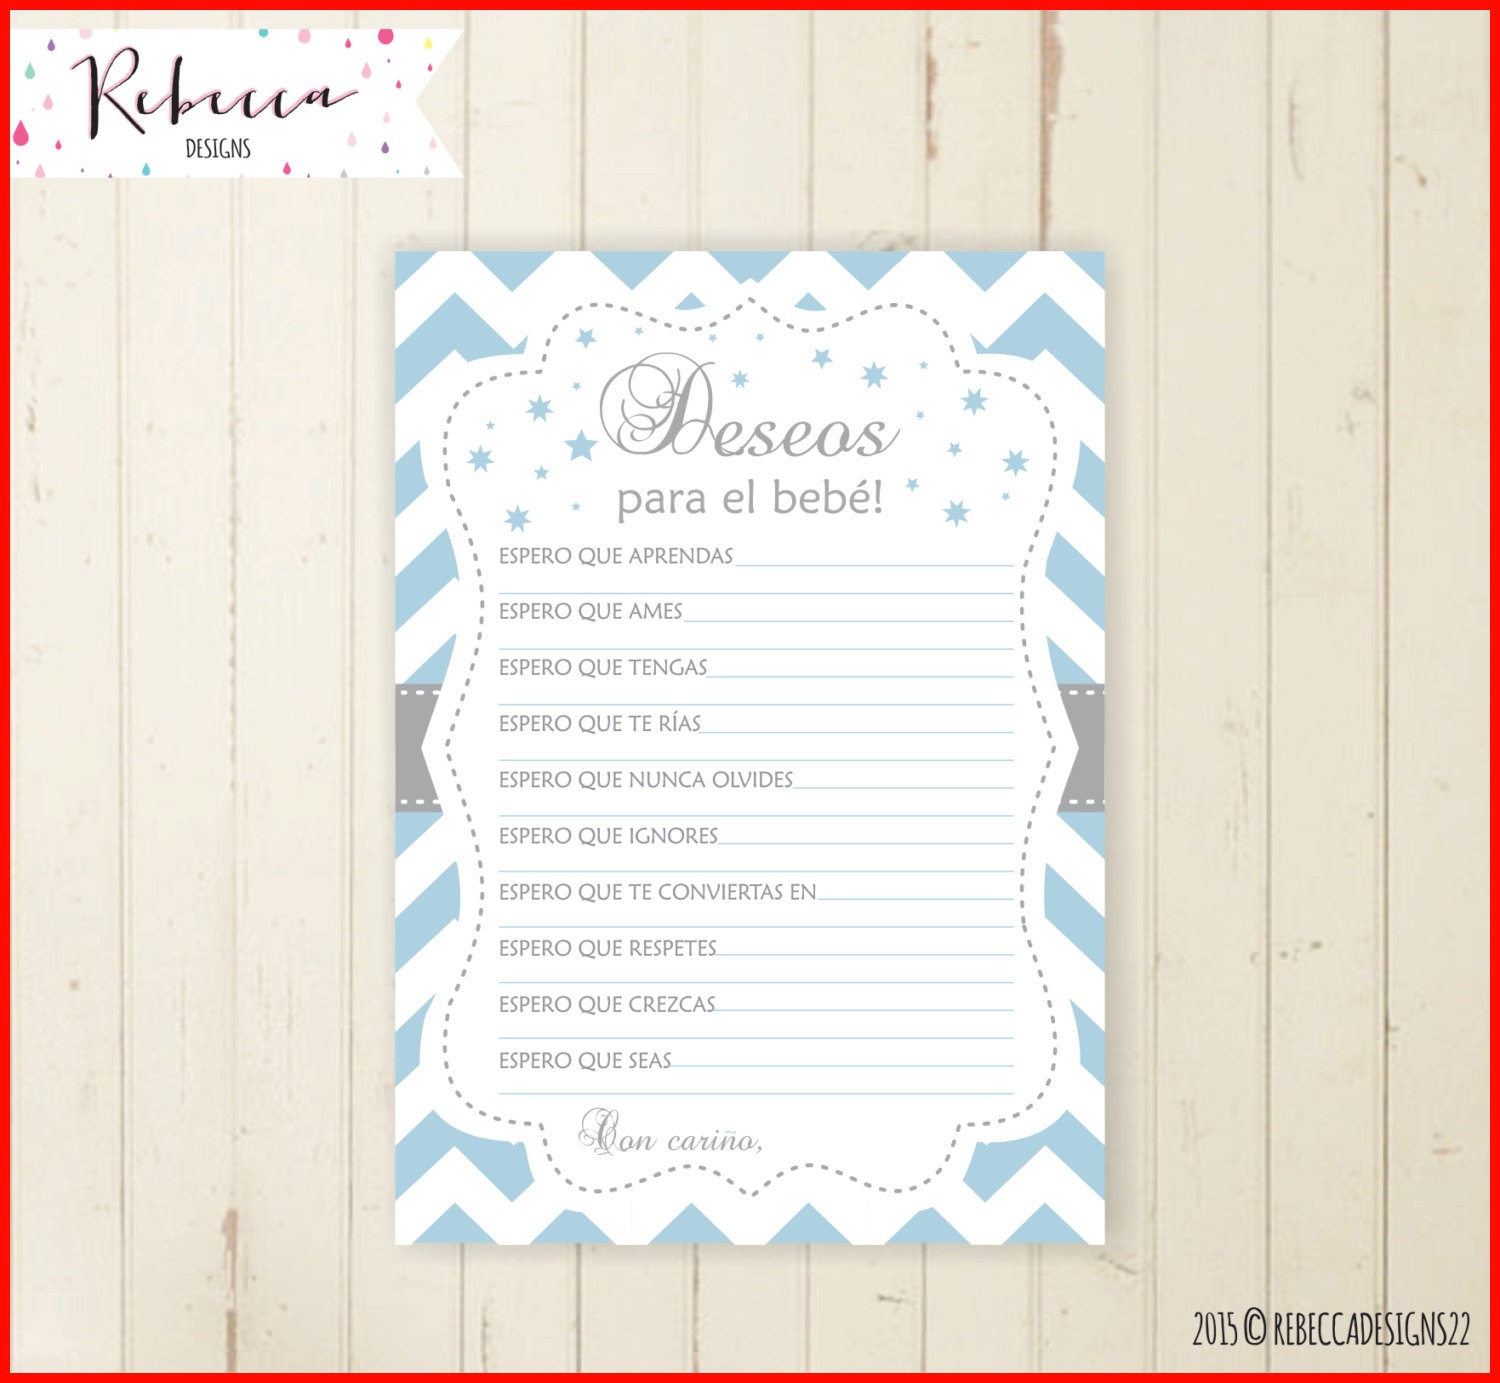 Full Size of Baby Shower:stylish Baby Shower Wishes Picture Inspirations Baby Shower Wishes Spanish Baby Shower Invitations 43504 Deseos Para El Bebe Baby Spanish Baby Shower Invitations 43504 Deseos Para El Bebe Baby Shower Wishes For Baby In Spanish